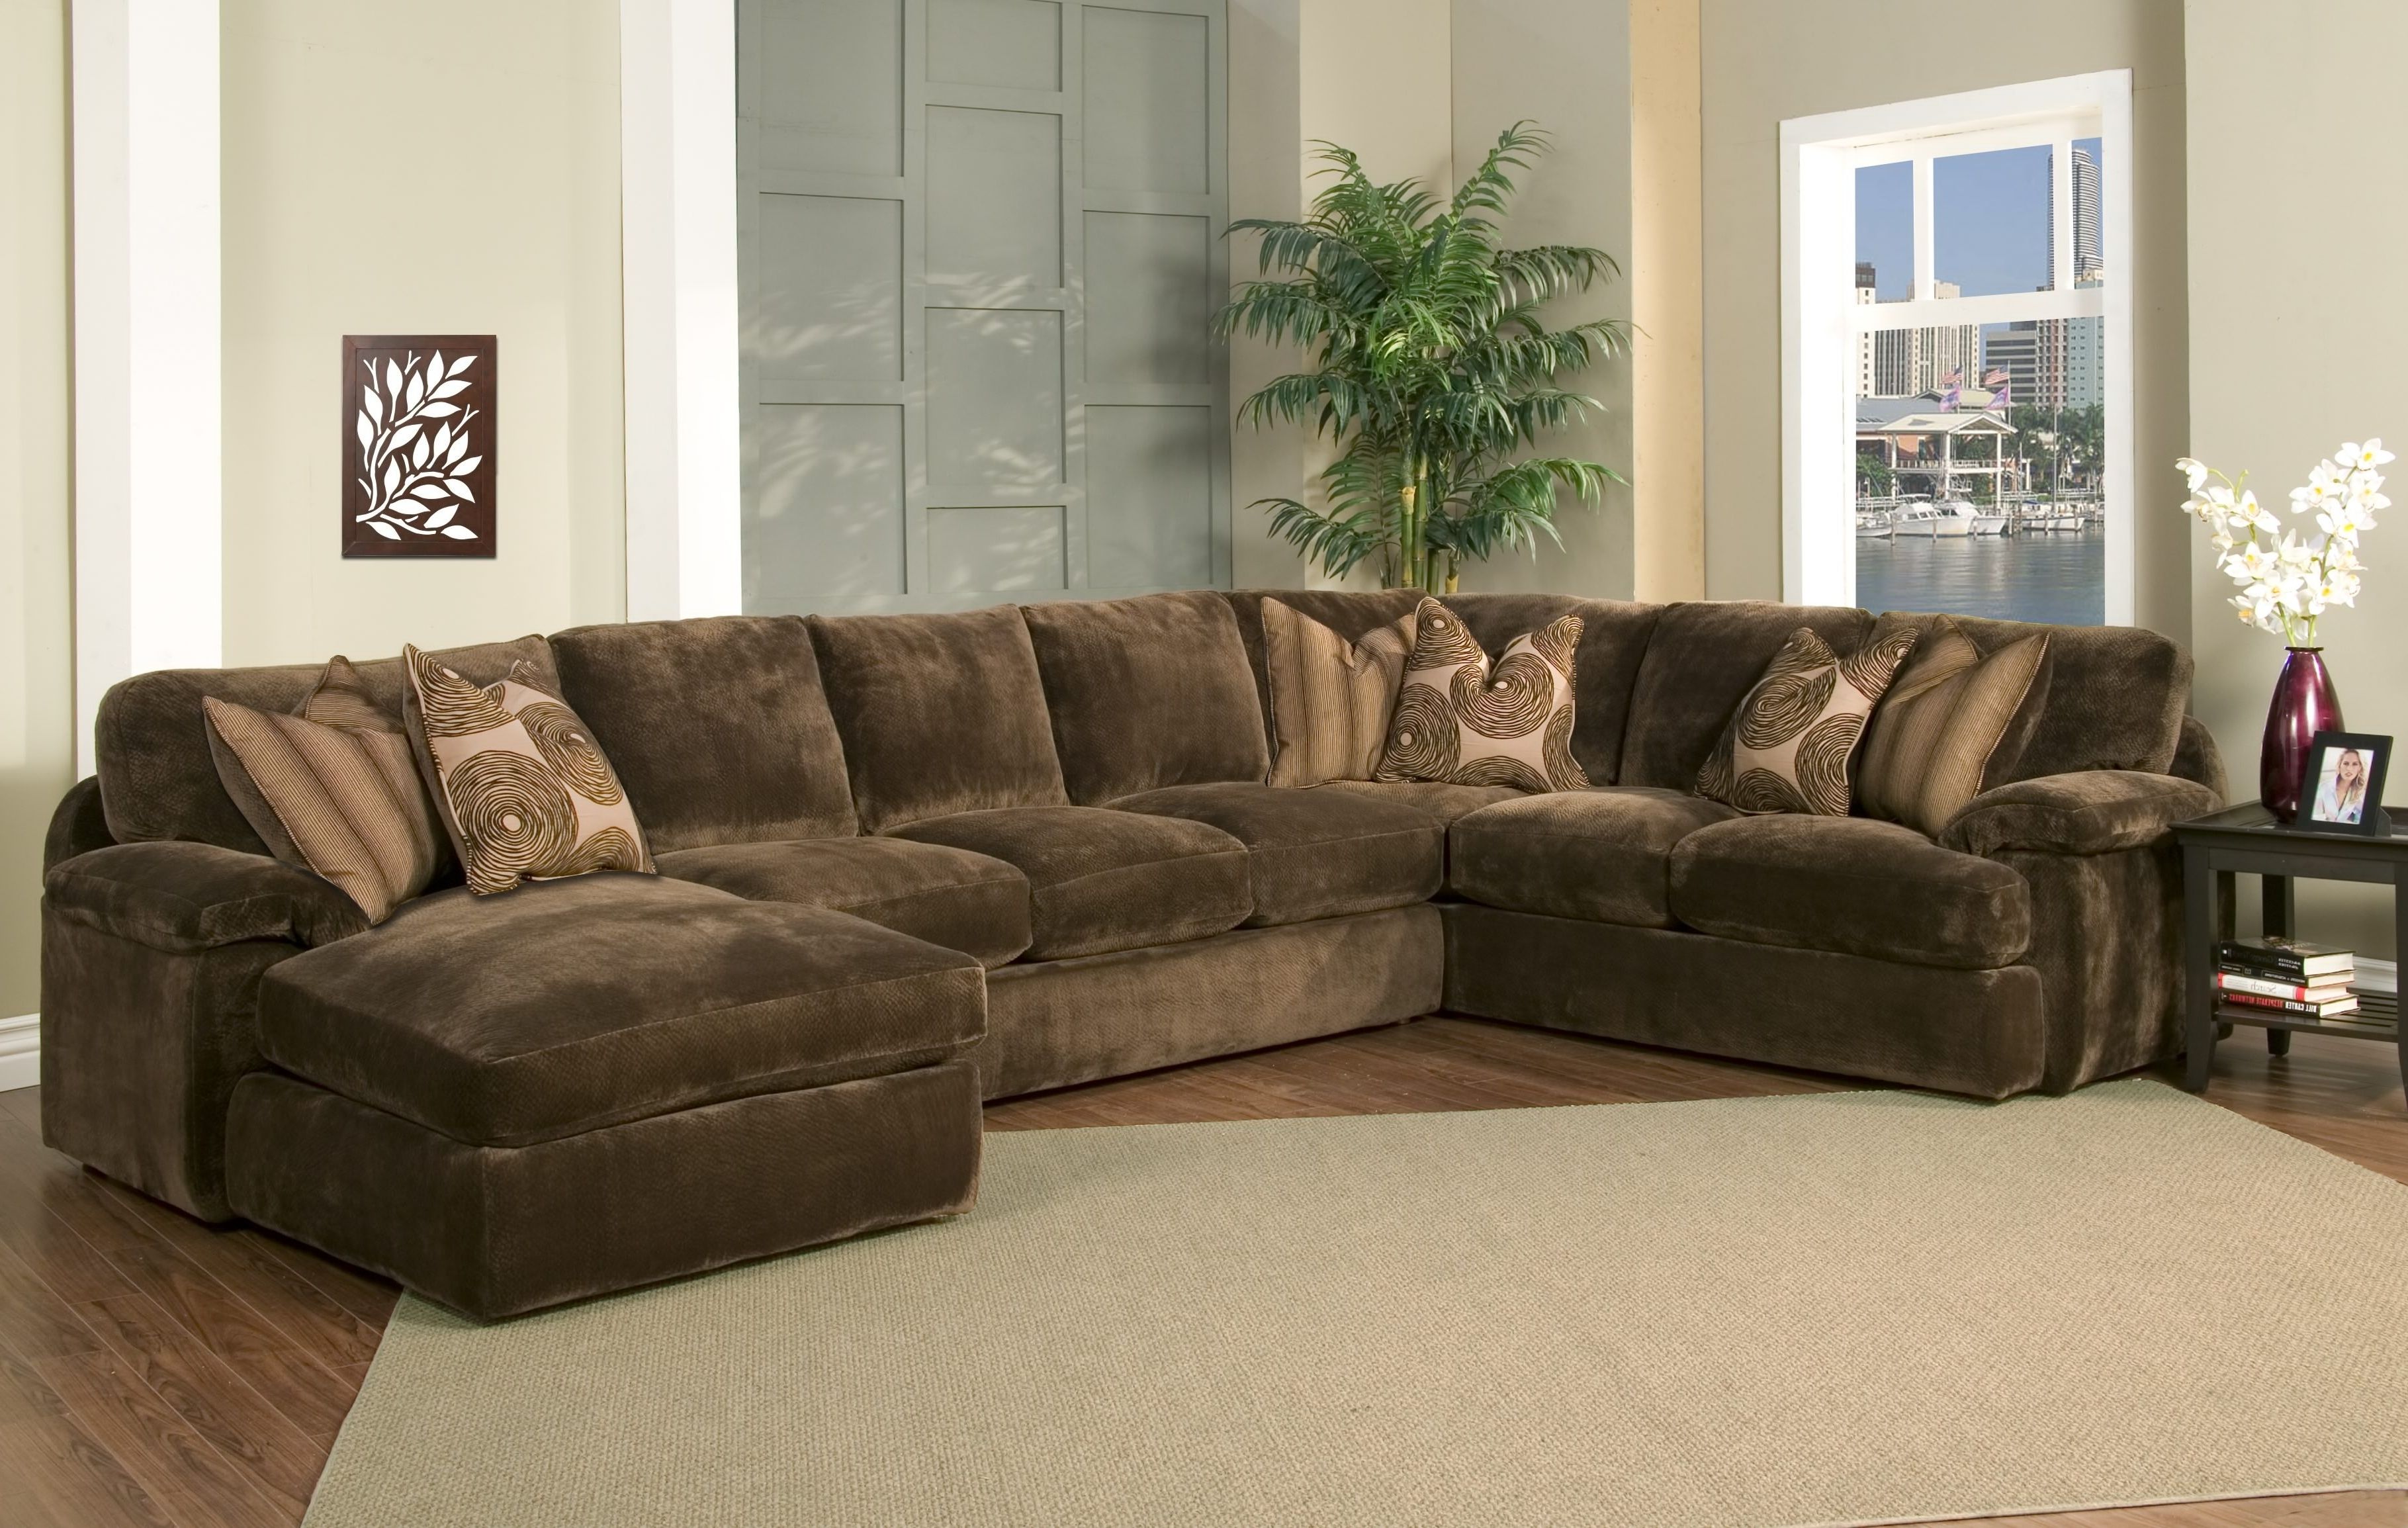 Goose Down Sectional Sofas For Newest Sectional Sofa Design: Down Sectional Sofa Blend Wrapped Goose (View 1 of 20)